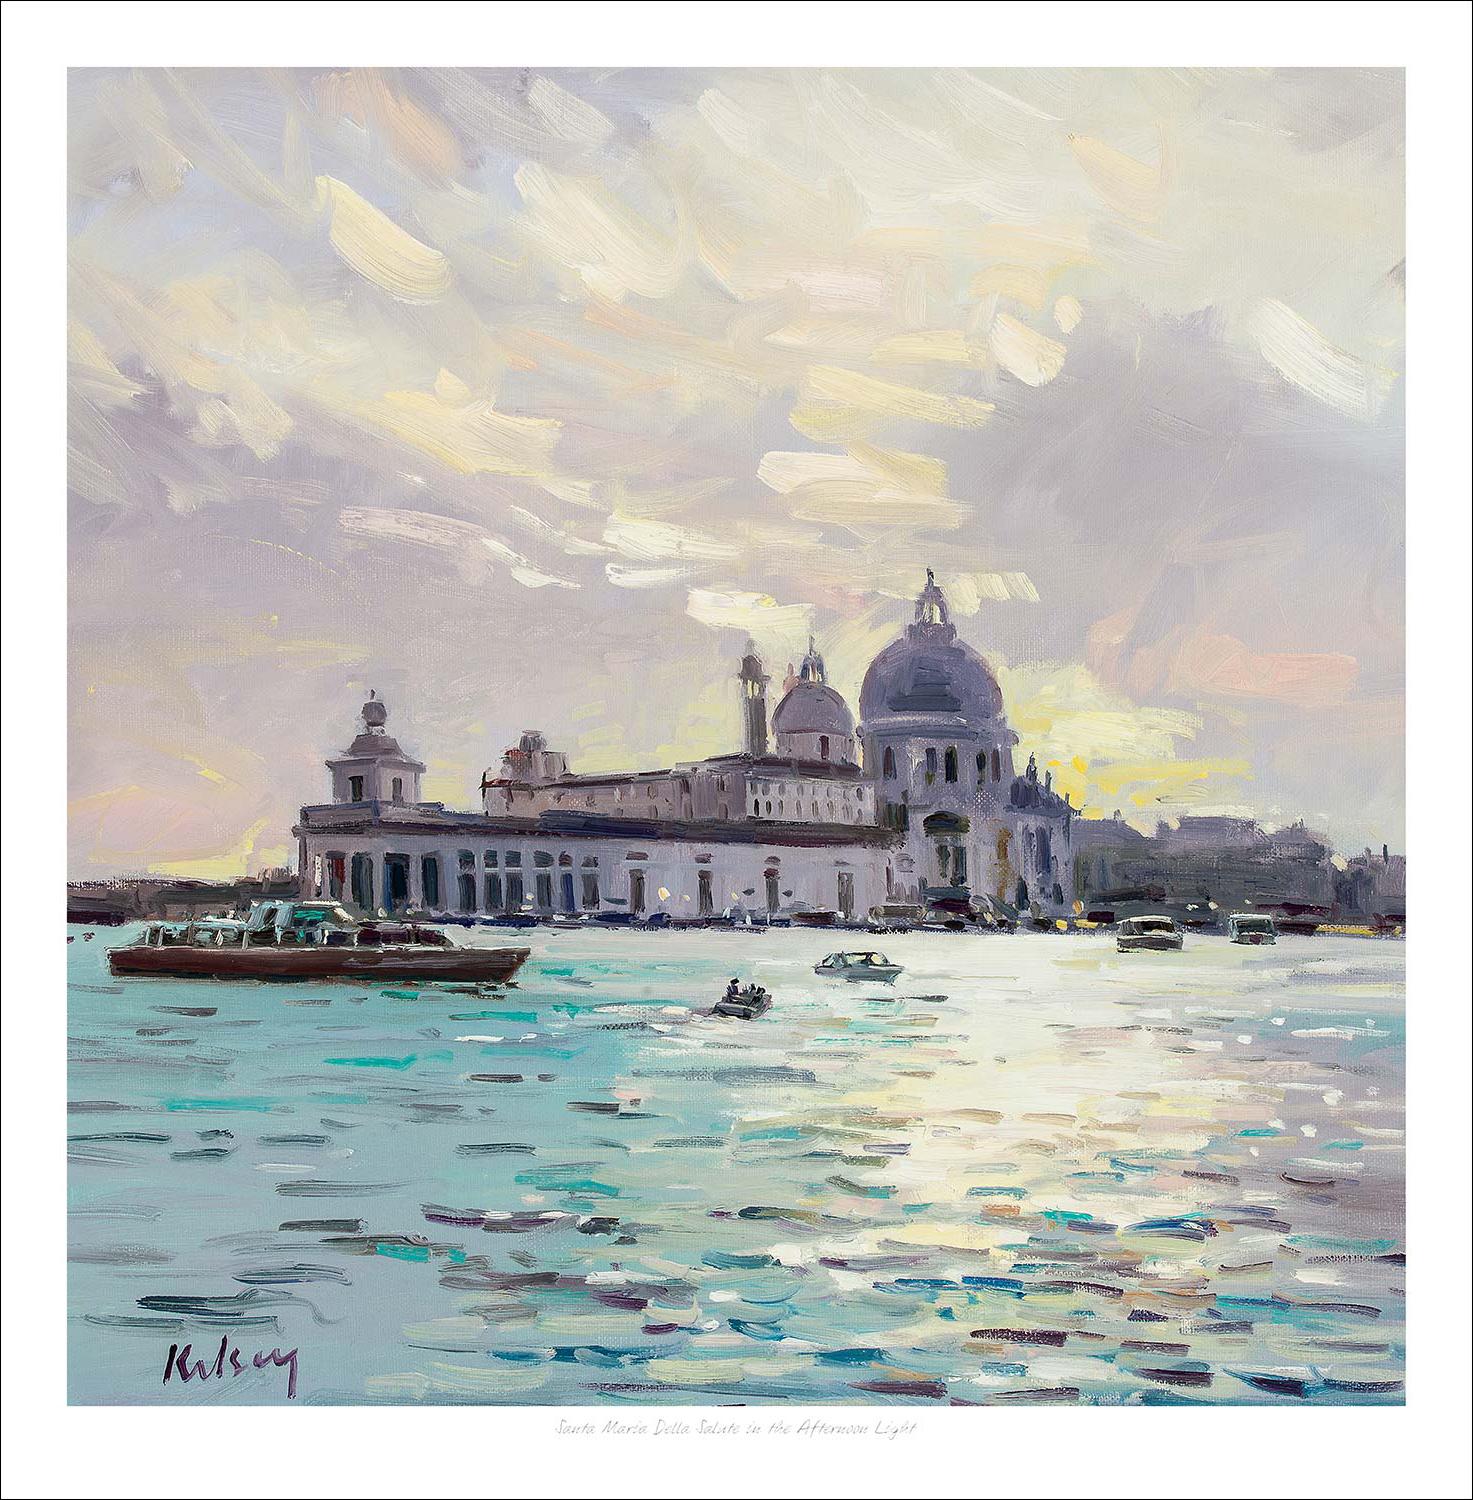 Santa Maria Della Saluté in the Afternoon Light Art Print from an original painting by artist Robert Kelsey